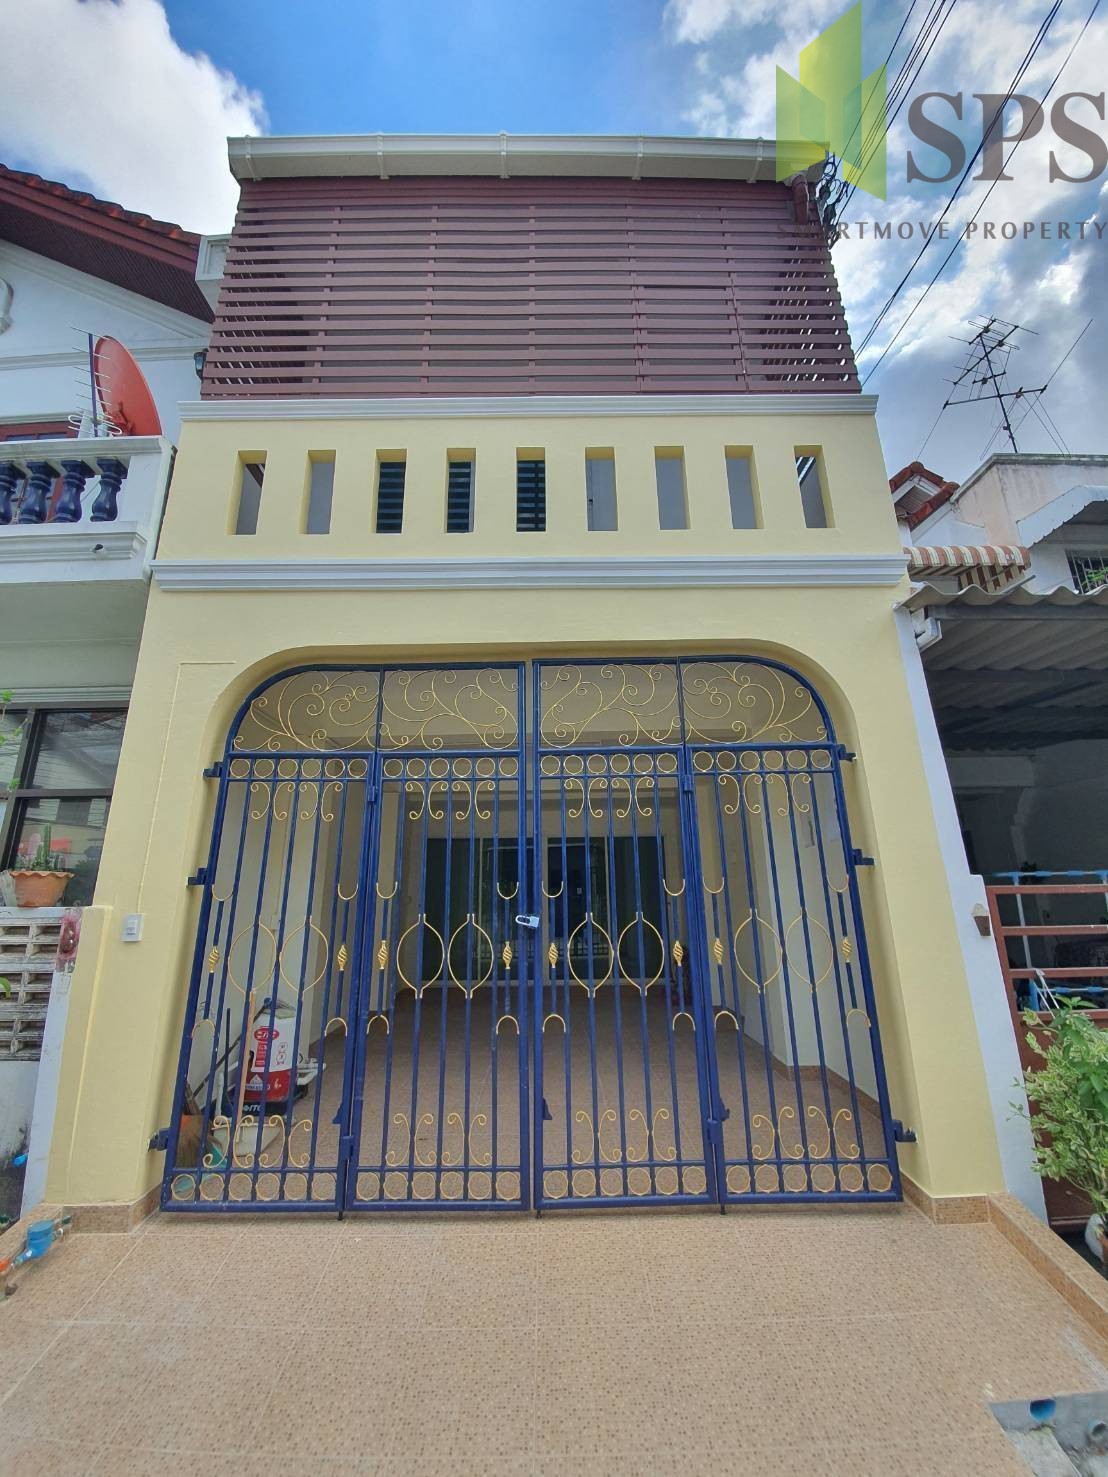 Renovated Townhouse for RENT in Sukhumvit 101/1 (SPSP391)